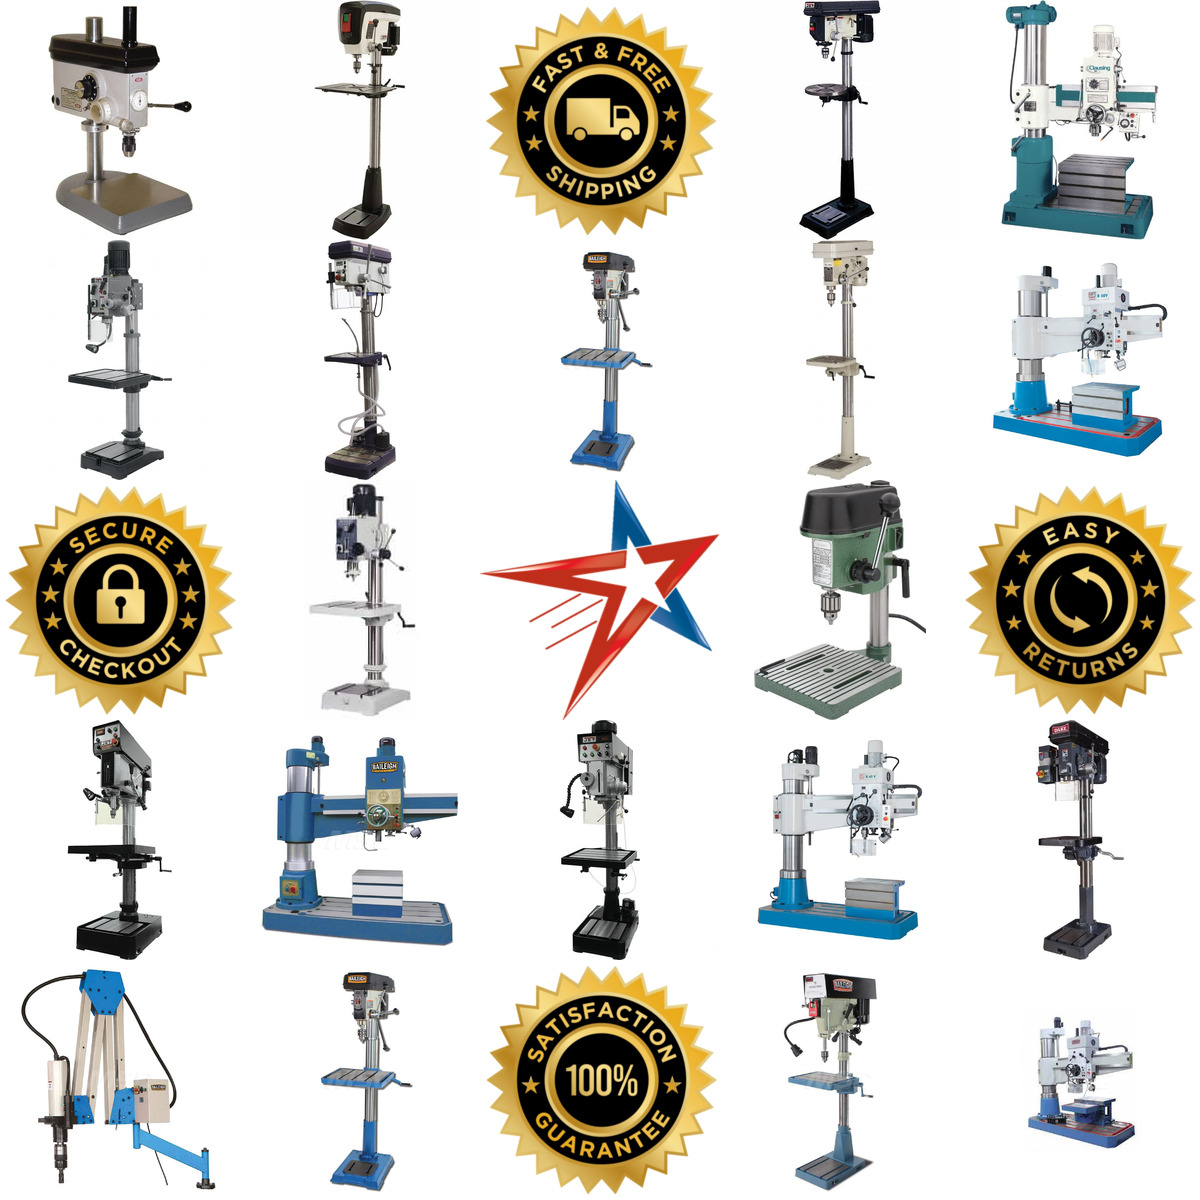 A selection of Floor and Bench Drill Presses products on GoVets